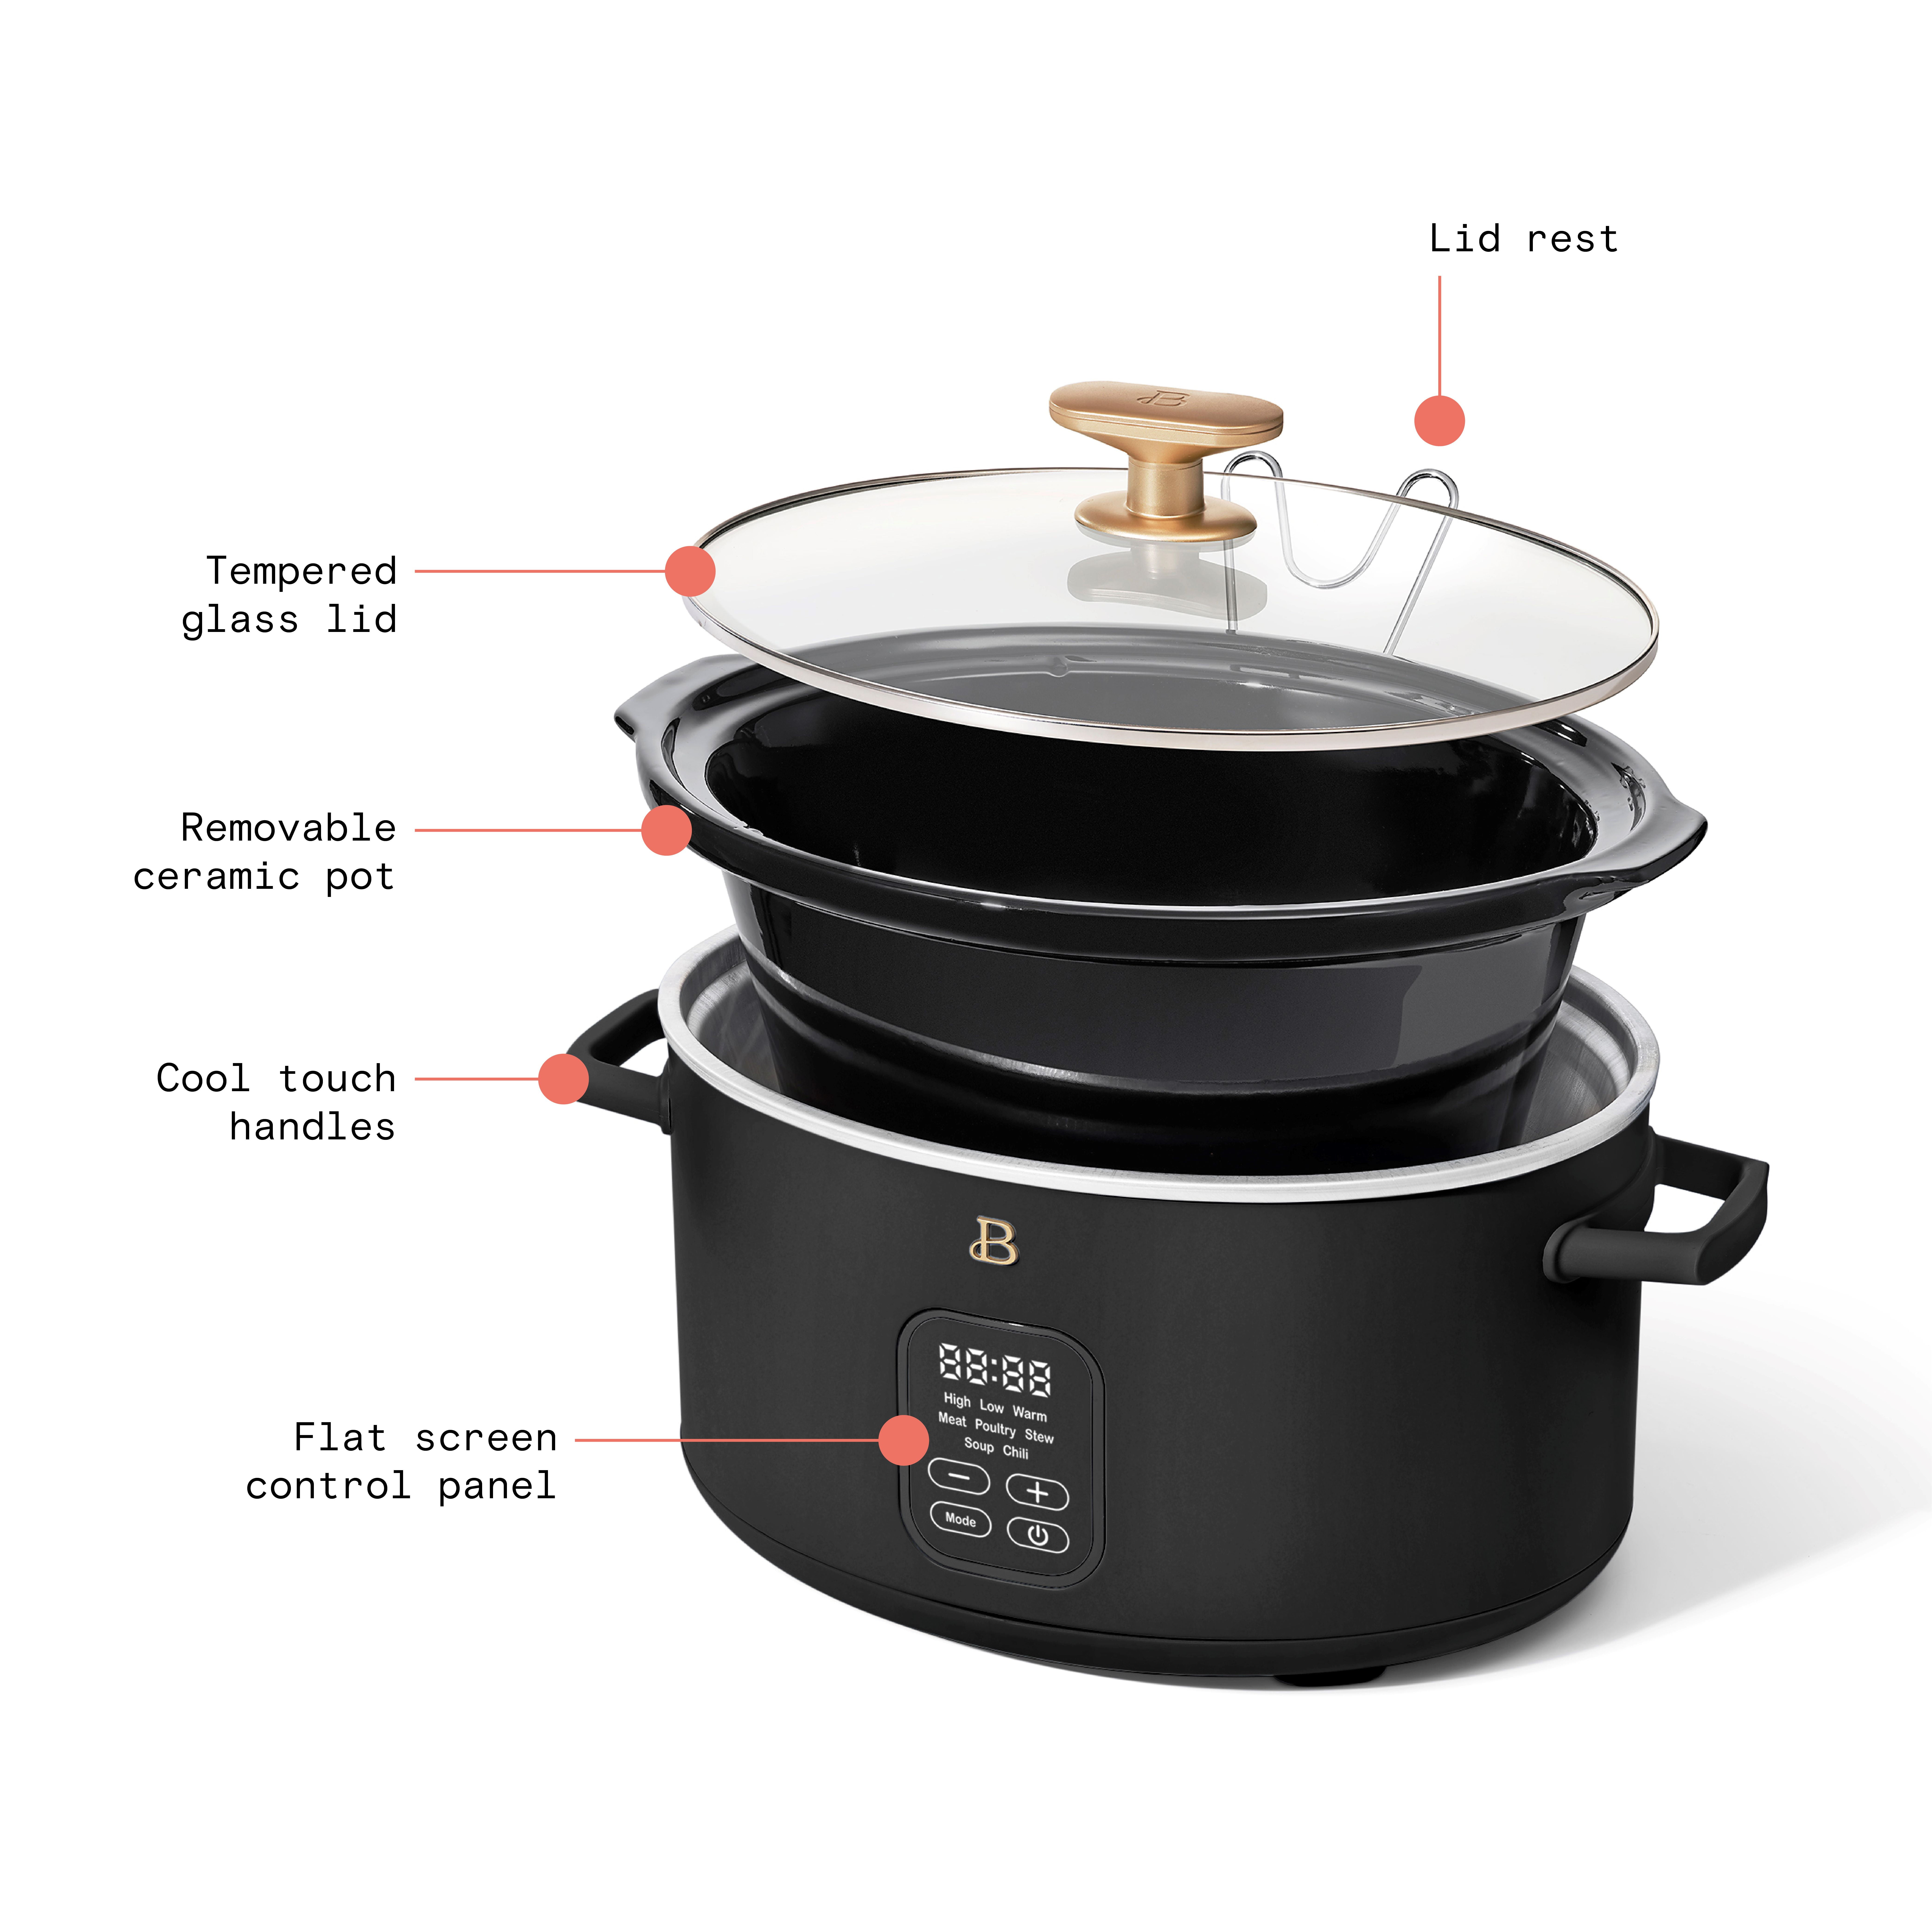 Drew Barrymore's cookware line just marked its slow cooker down to only $35